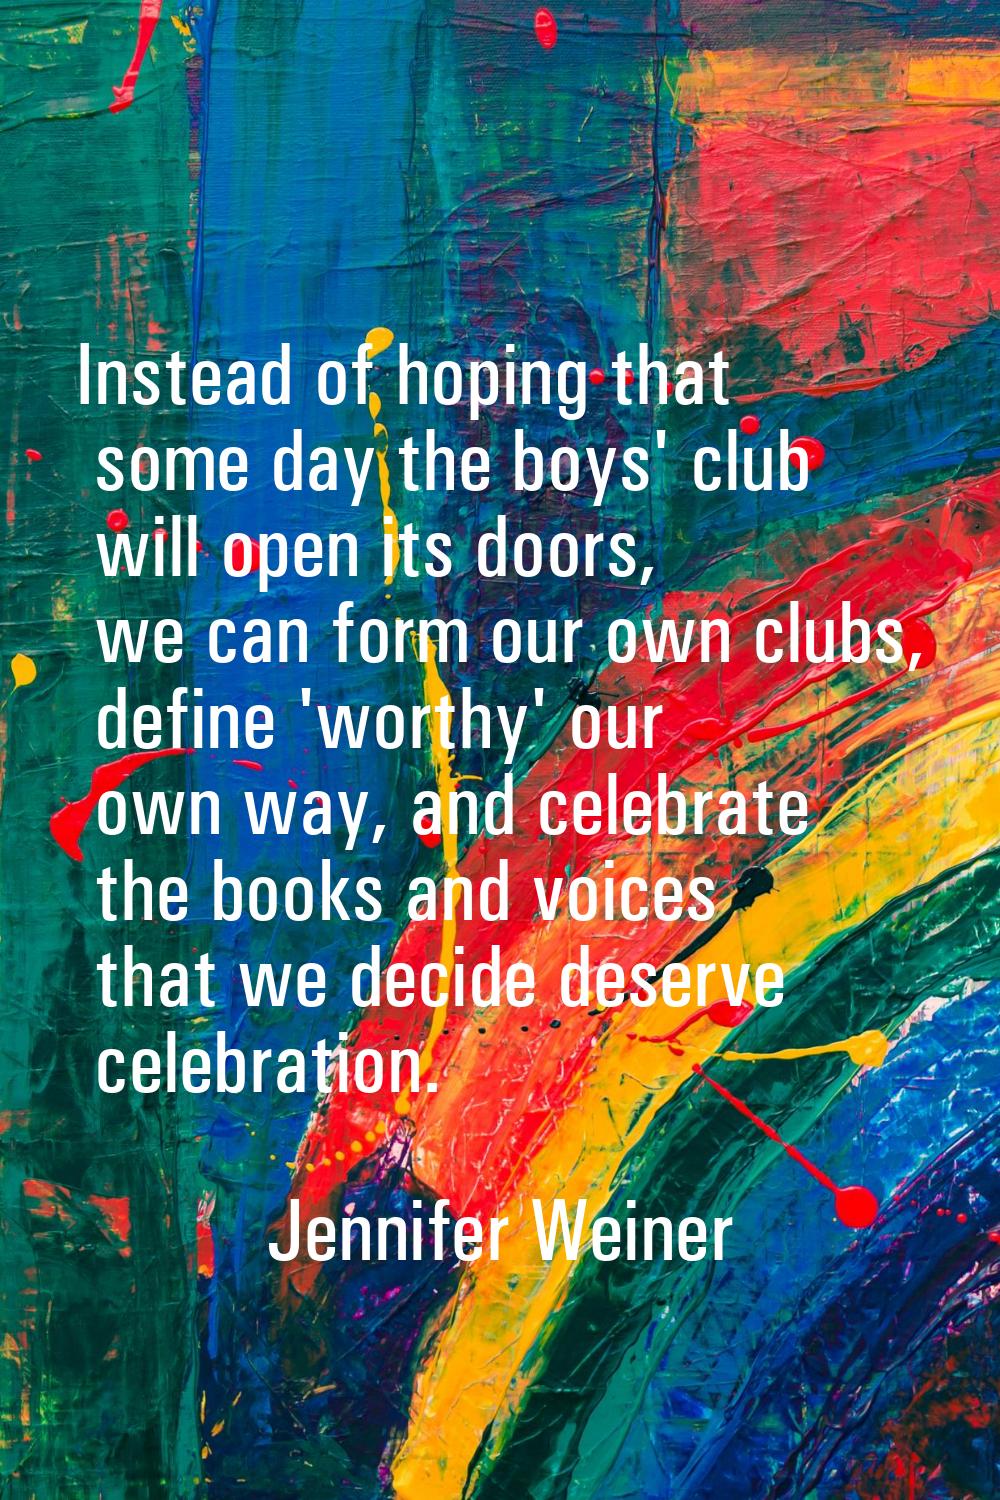 Instead of hoping that some day the boys' club will open its doors, we can form our own clubs, defi